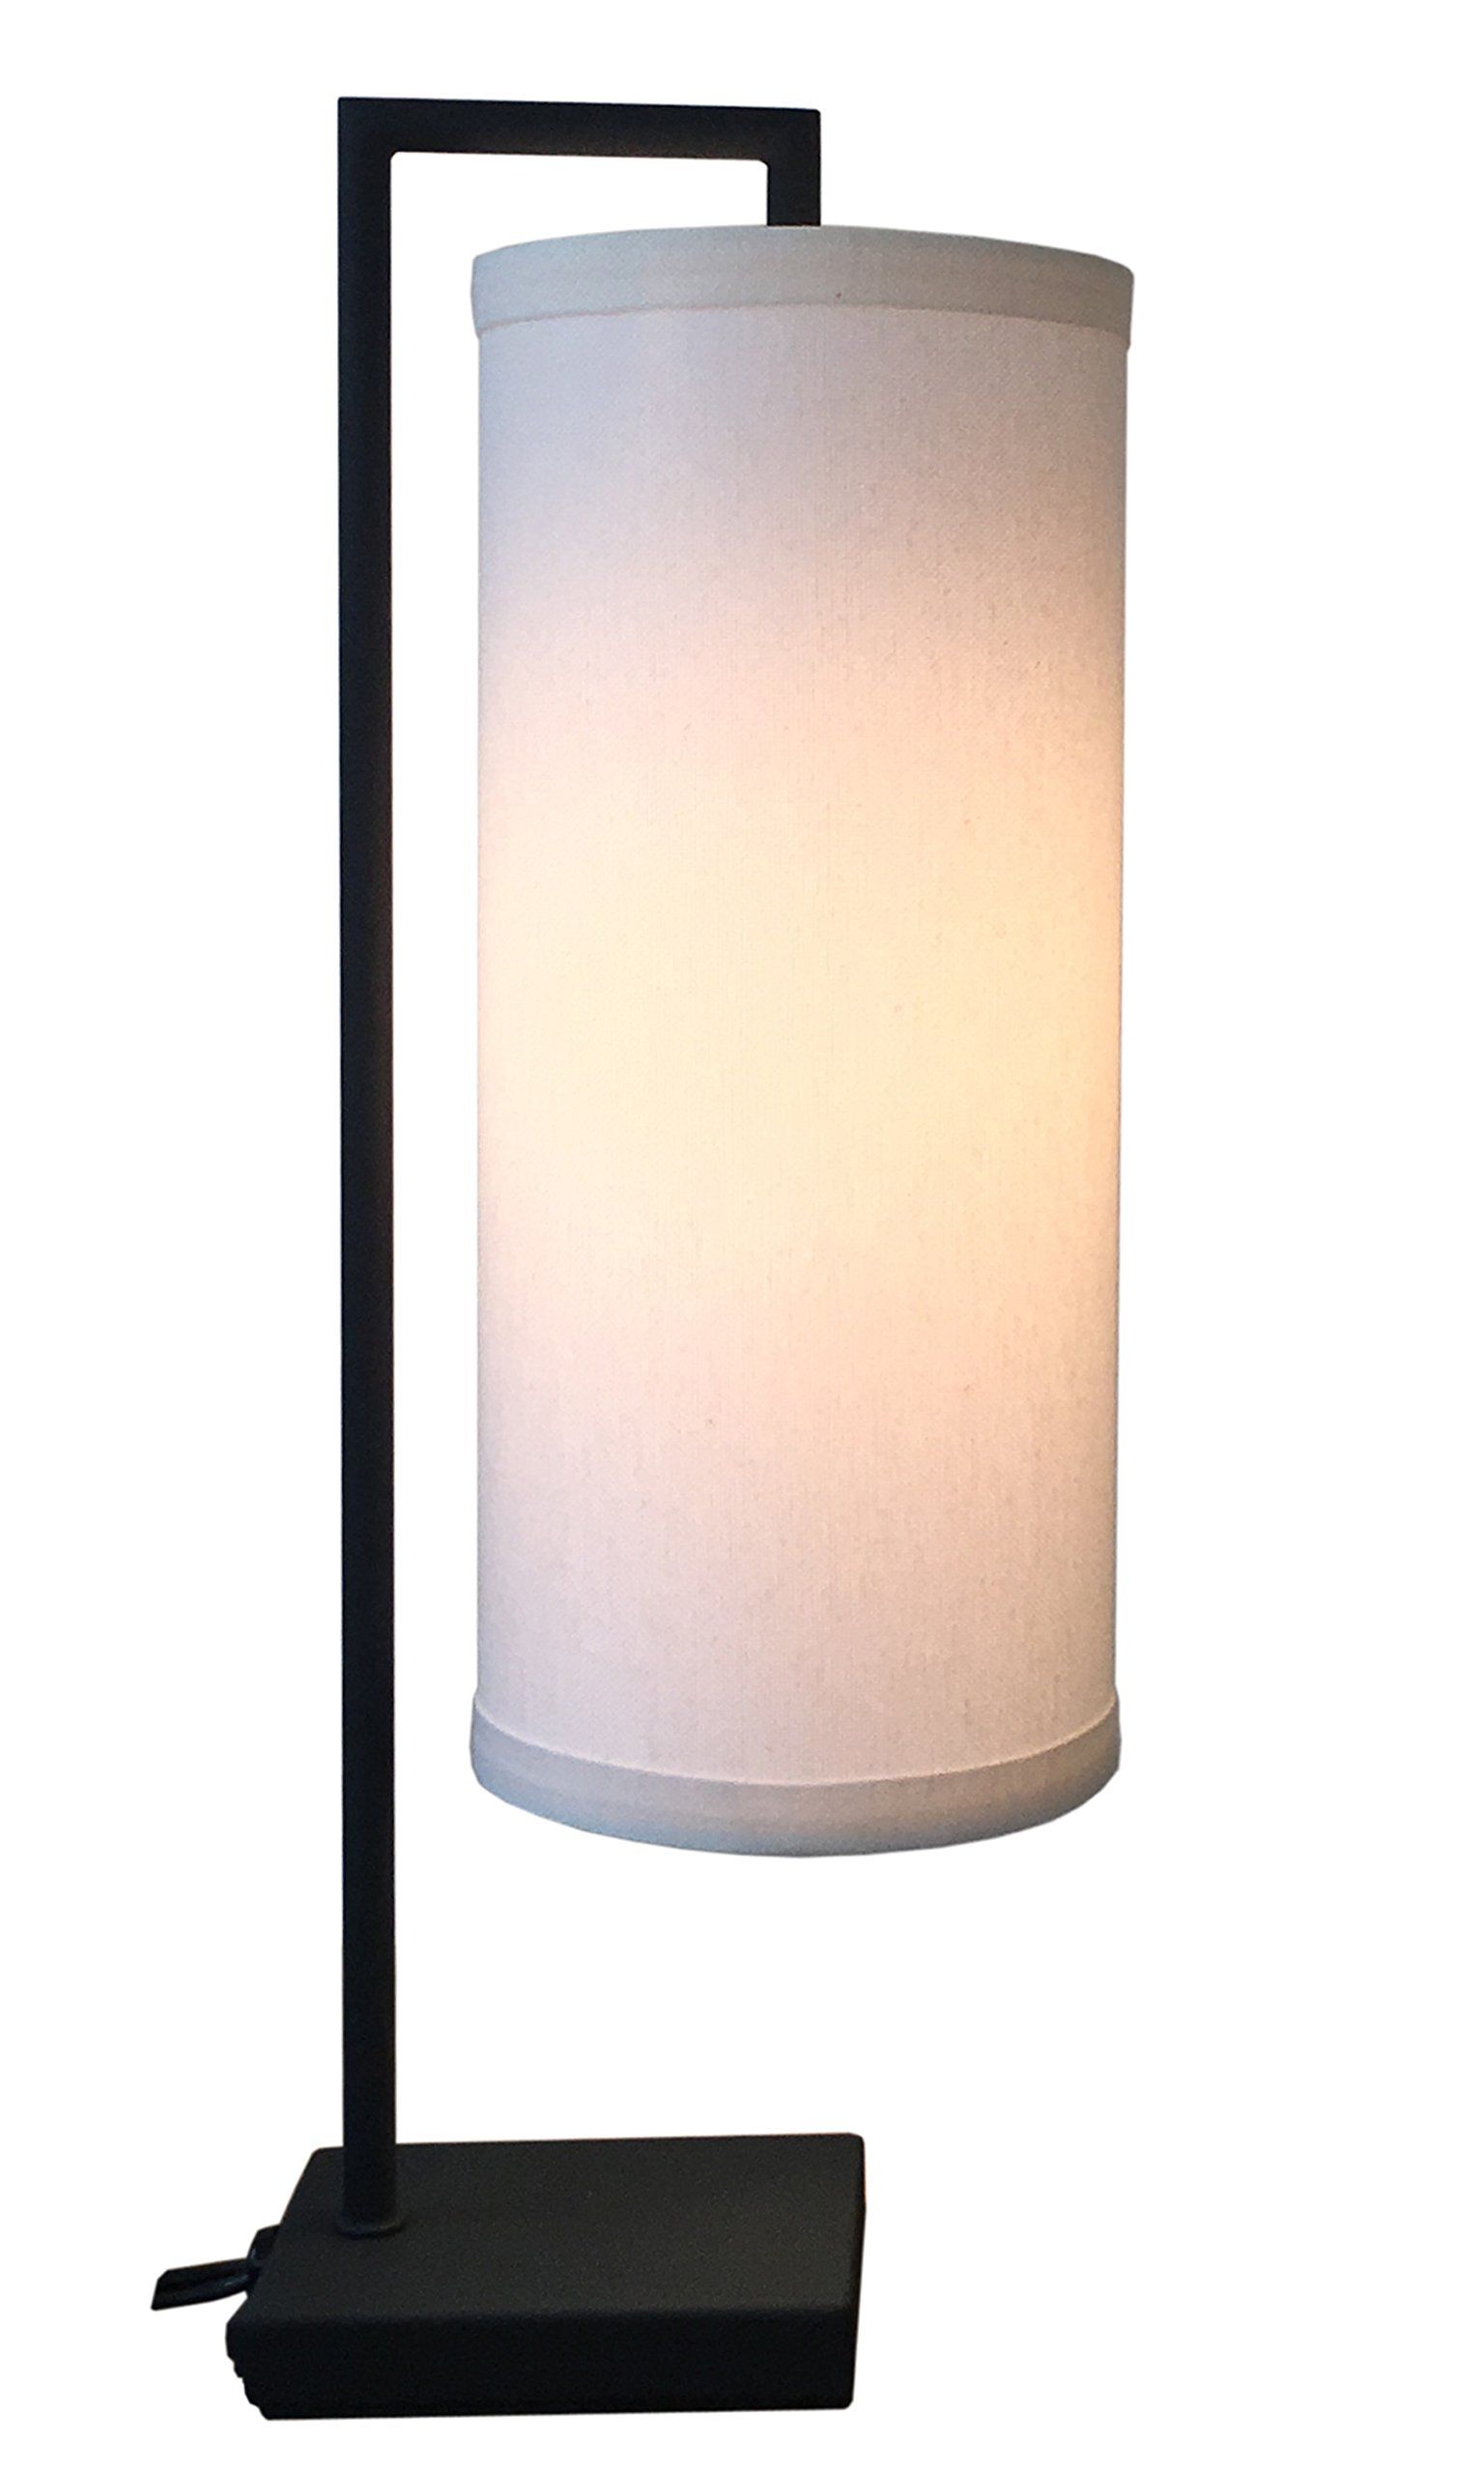 lusk original design bedside table lamp elegant inch tall accent lamps with warm glowing linen shade matte black check out the visiting silver home accents battery operated